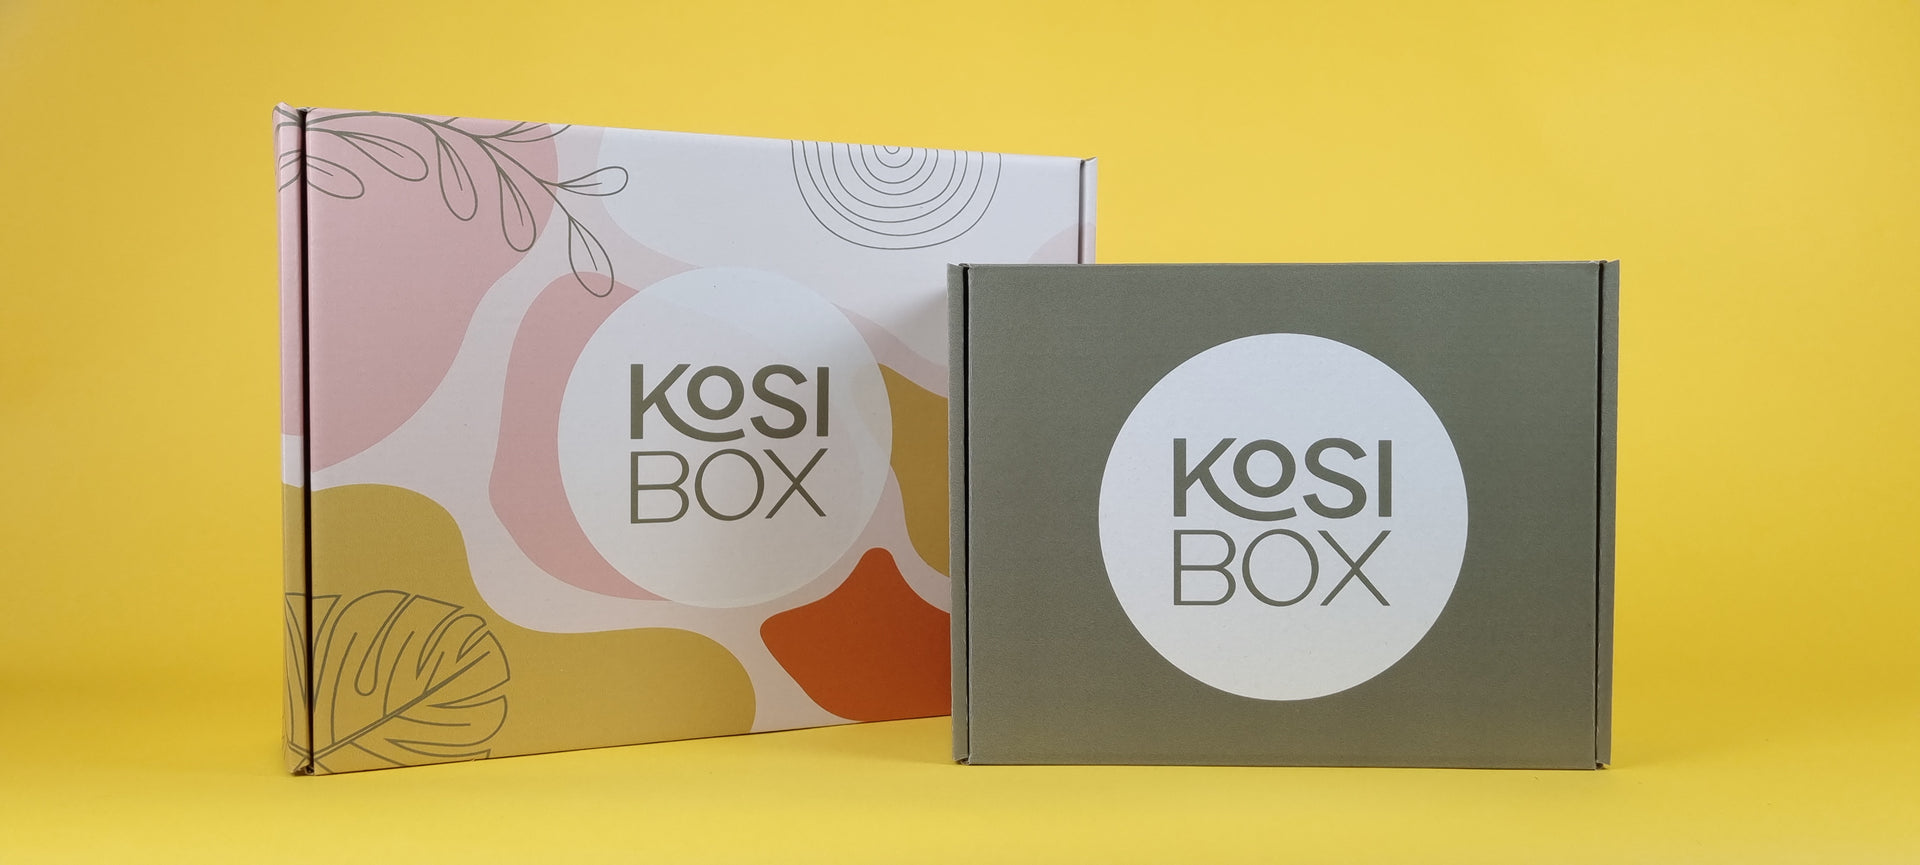 Video laden: This video shows you the prototype of our first eco friendly kosibox giftbox